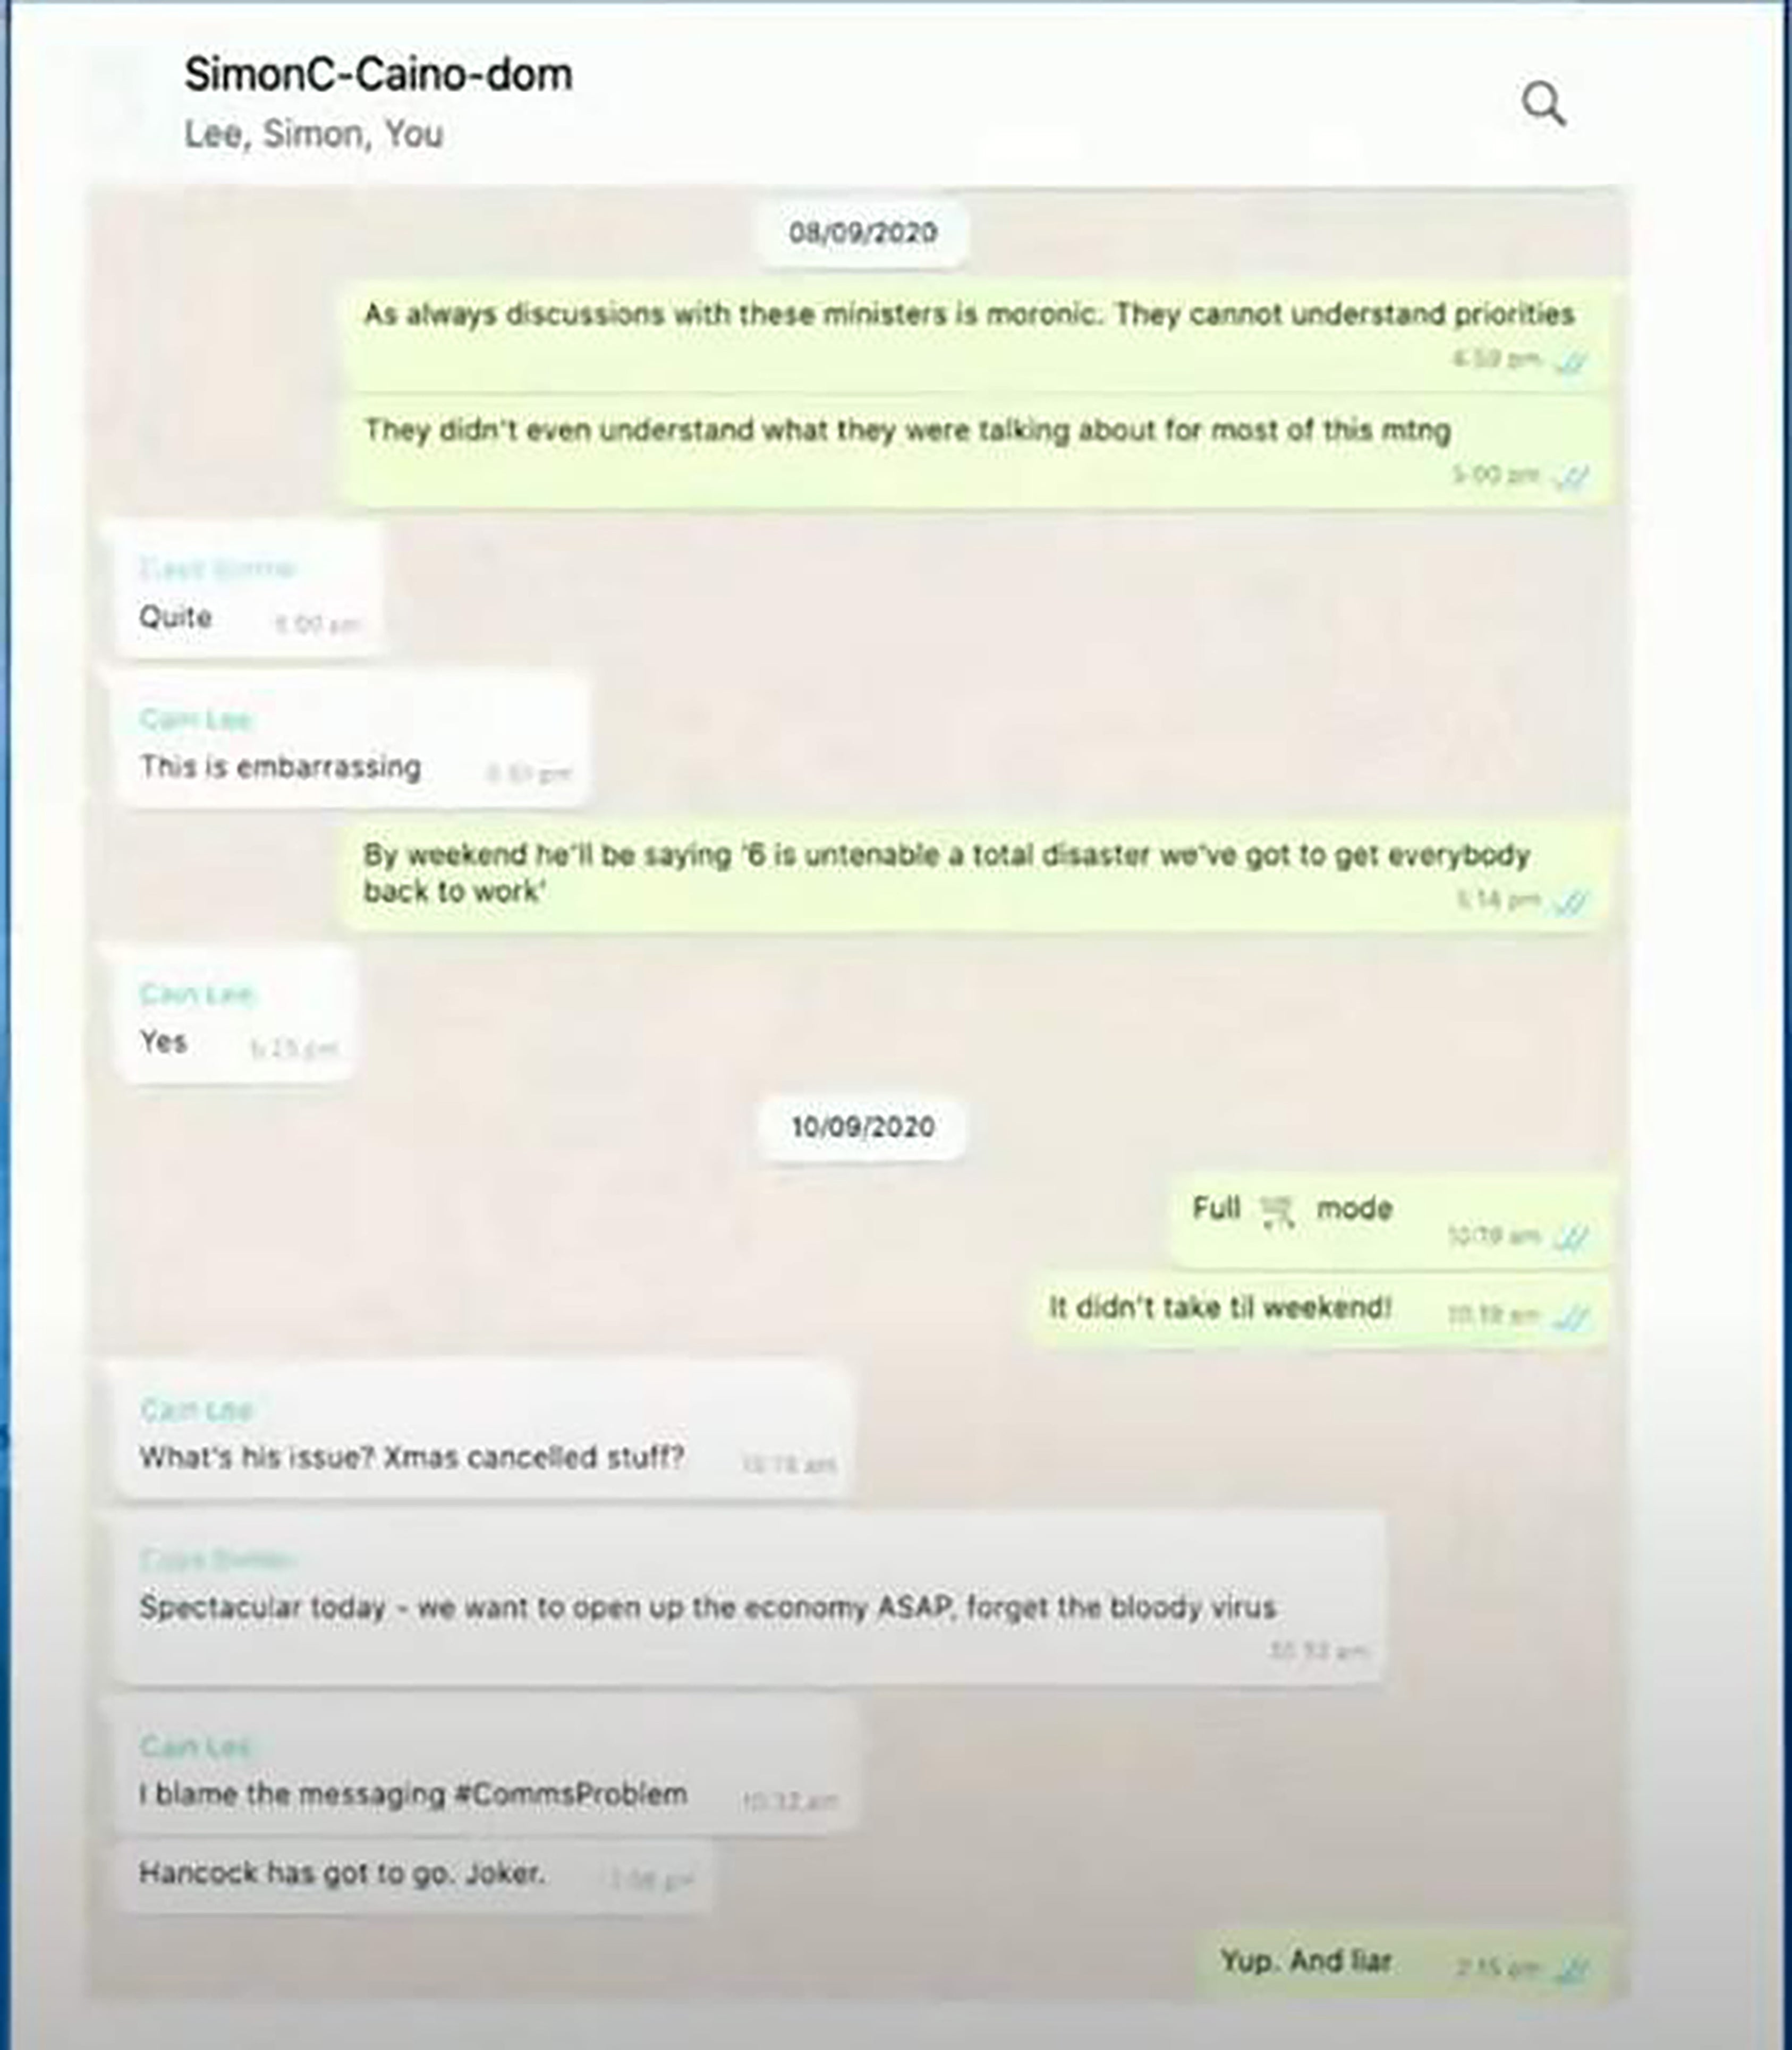 A WhatsApp exchange between Lee Cain, Dominic Cummings and cabinet secretary Simon Case. In the chat Mr Cummings describes Mr Johnson as going “full trolley mode”